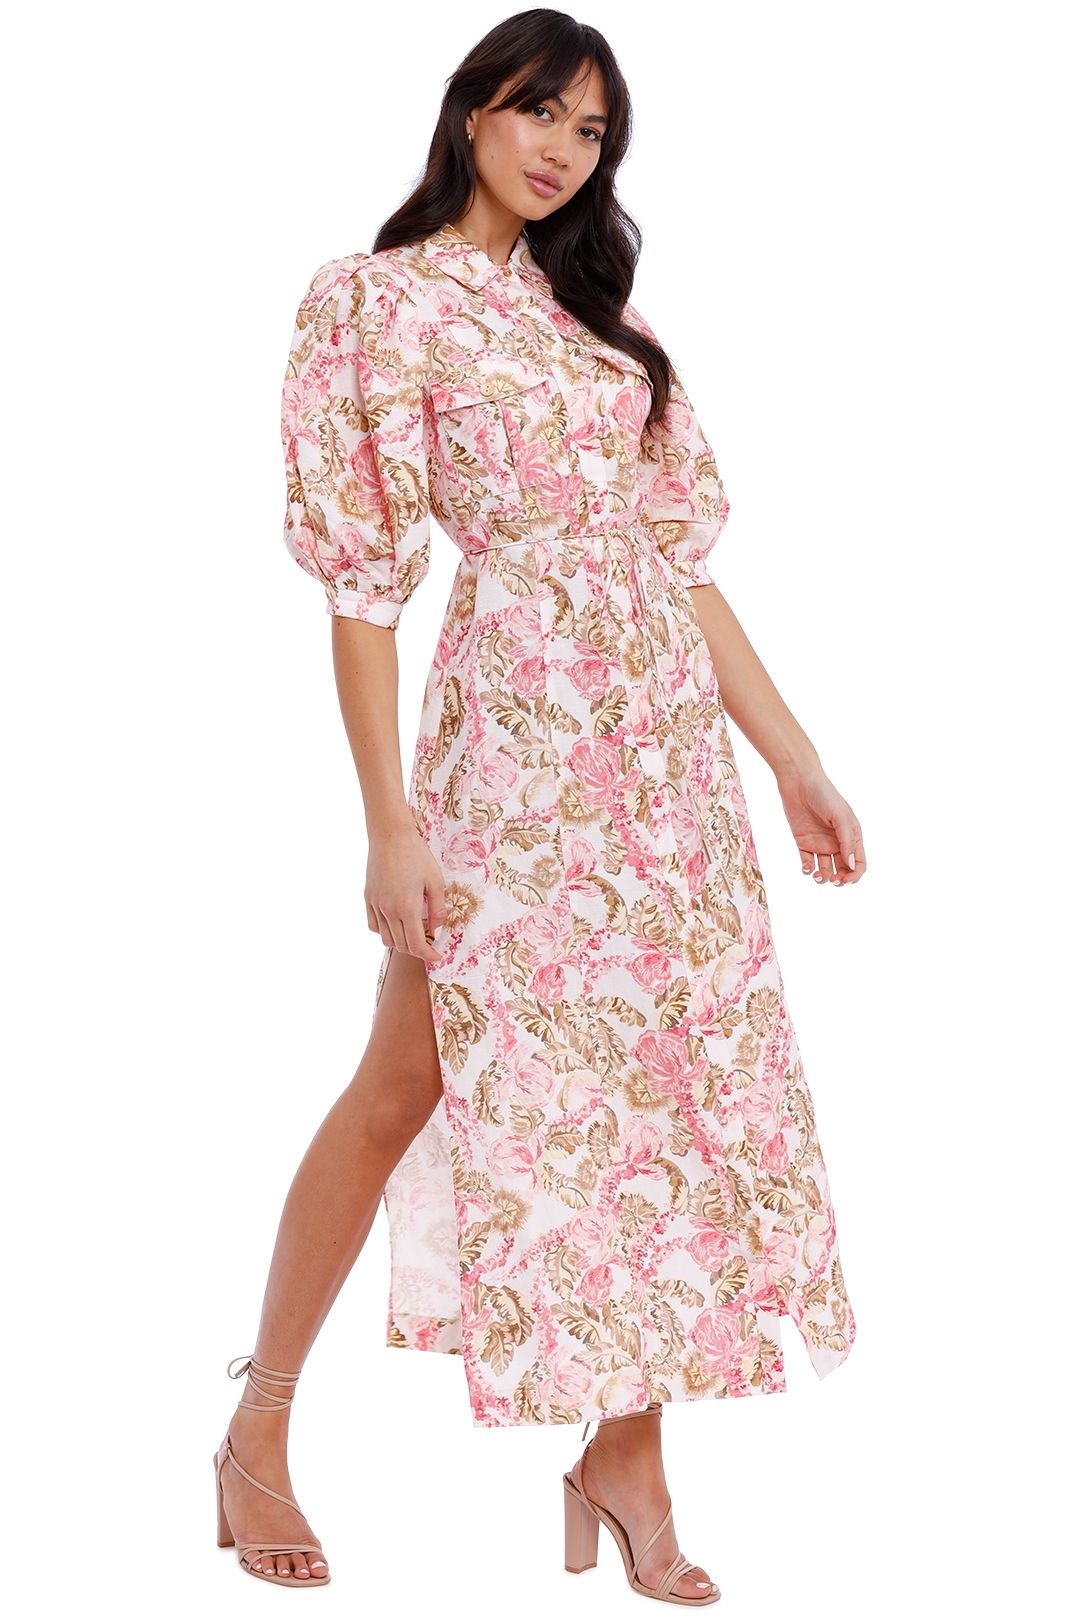 Significant Other Deanna Dress Sangria Floral print